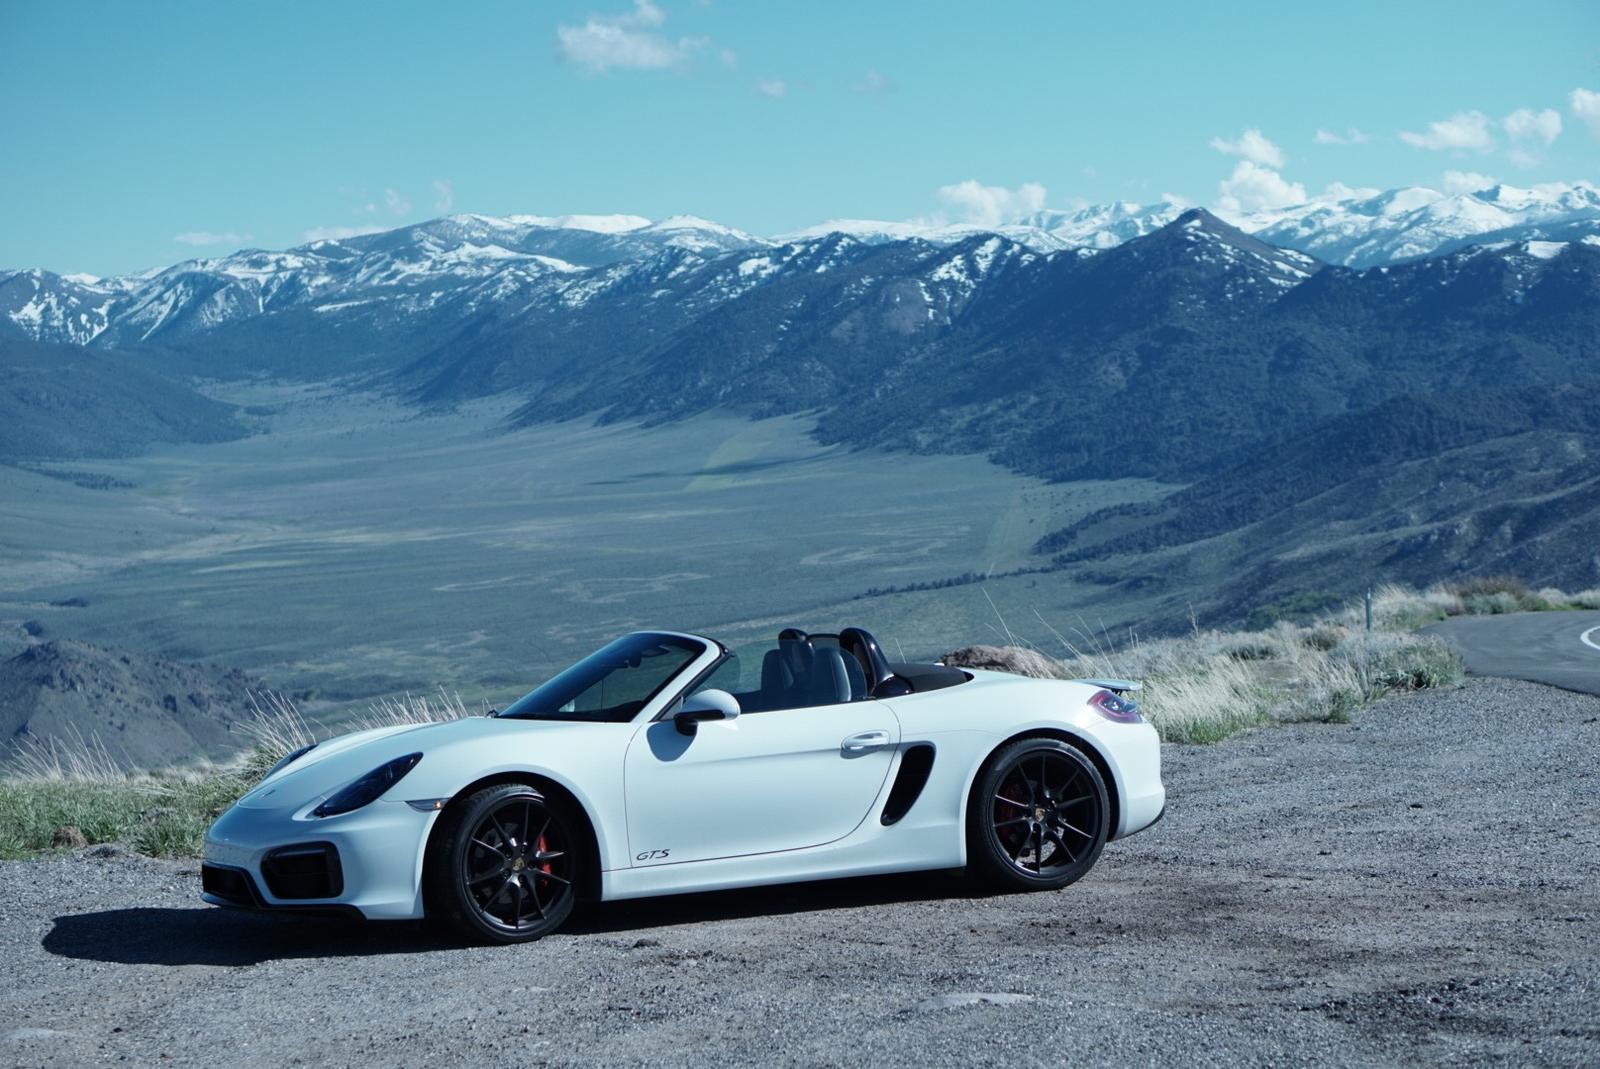 Used 2015 Porsche Boxster Gts White Leather Convertible